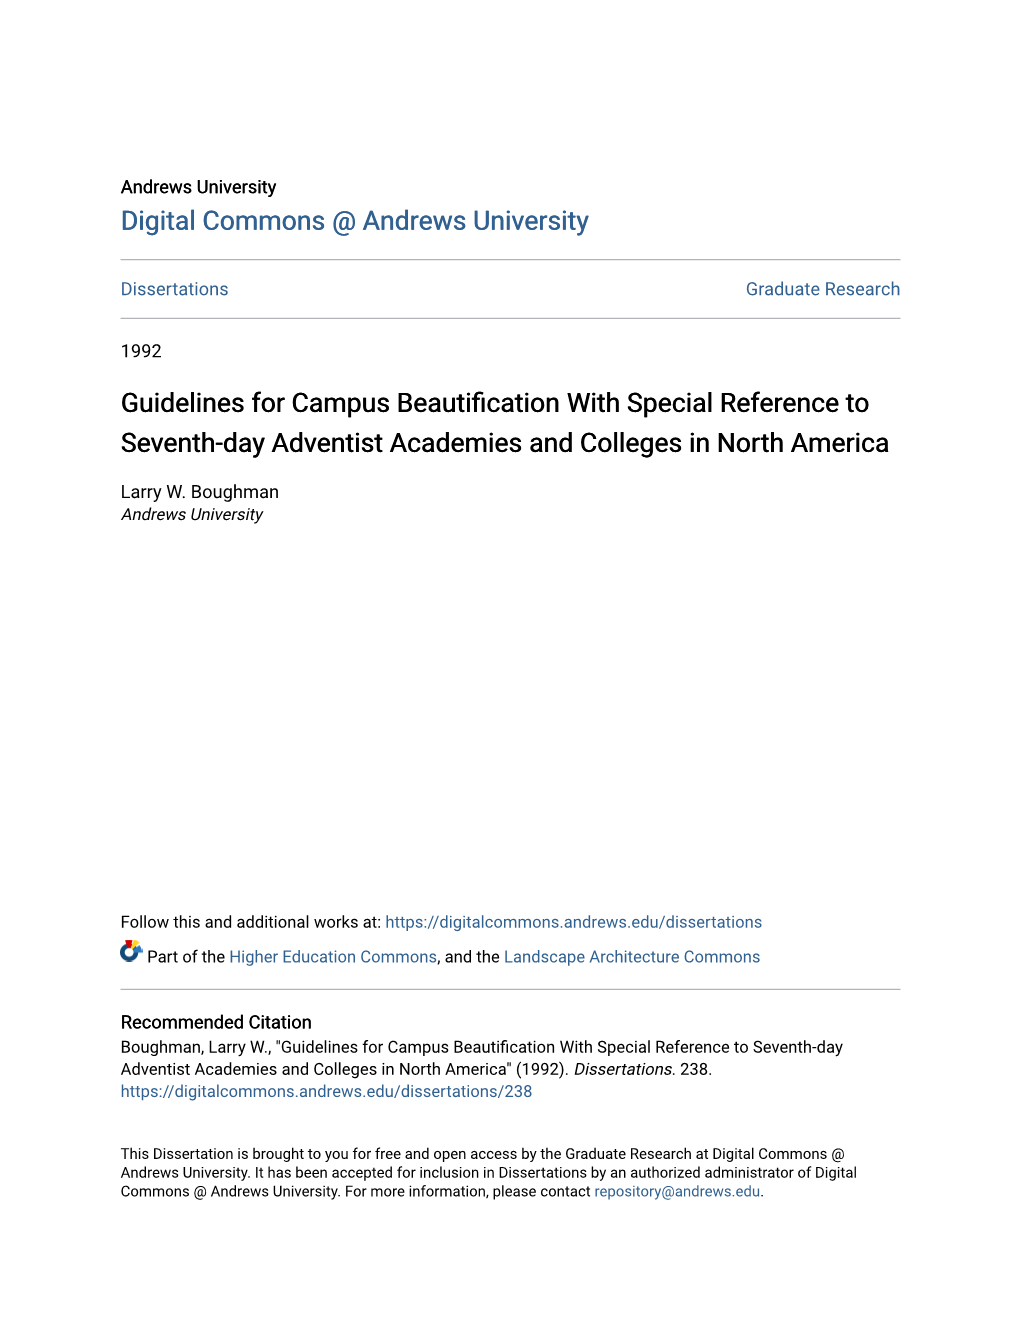 Guidelines for Campus Beautification with Special Reference to Seventh-Day Adventist Academies and Colleges in North America